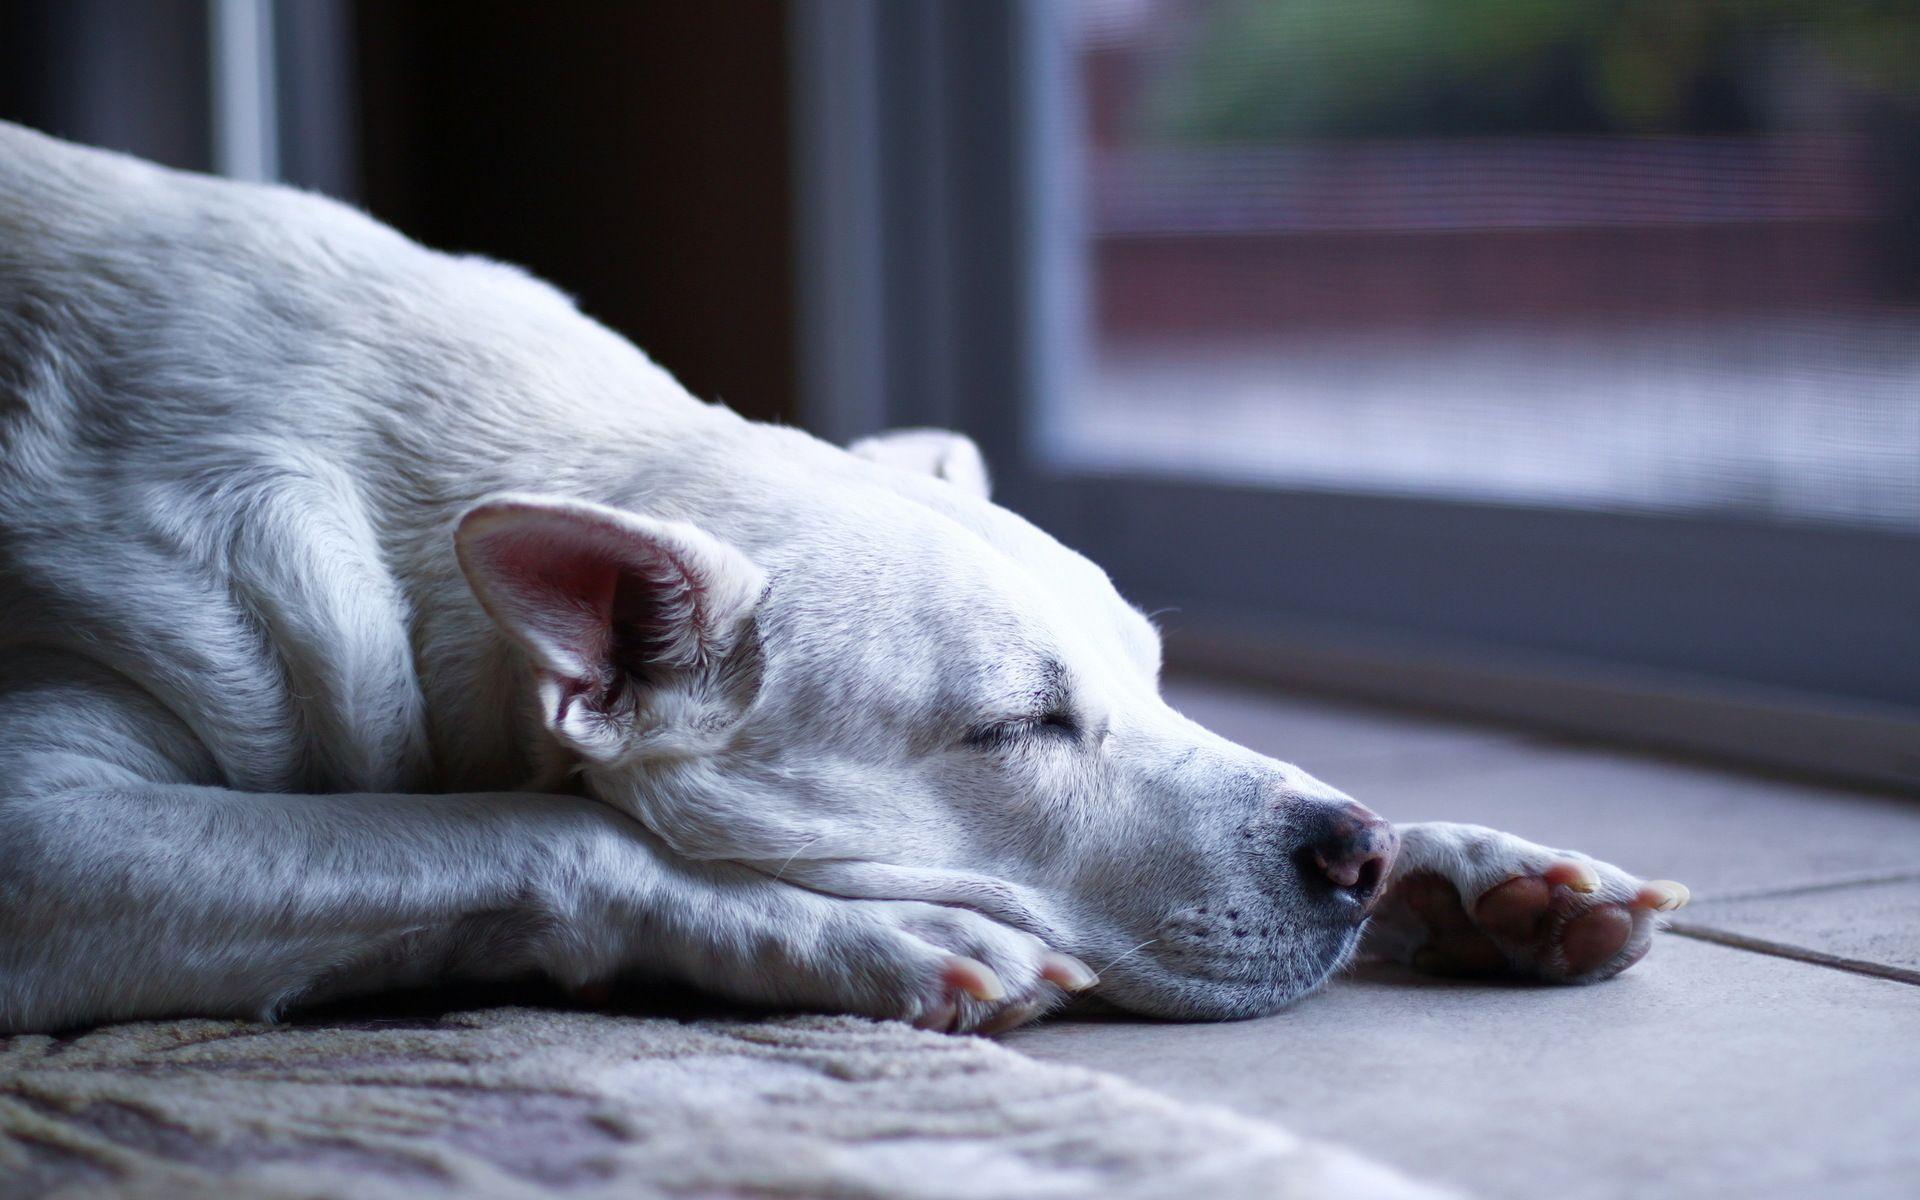 Dogo Argentino fell asleep wallpaper and image